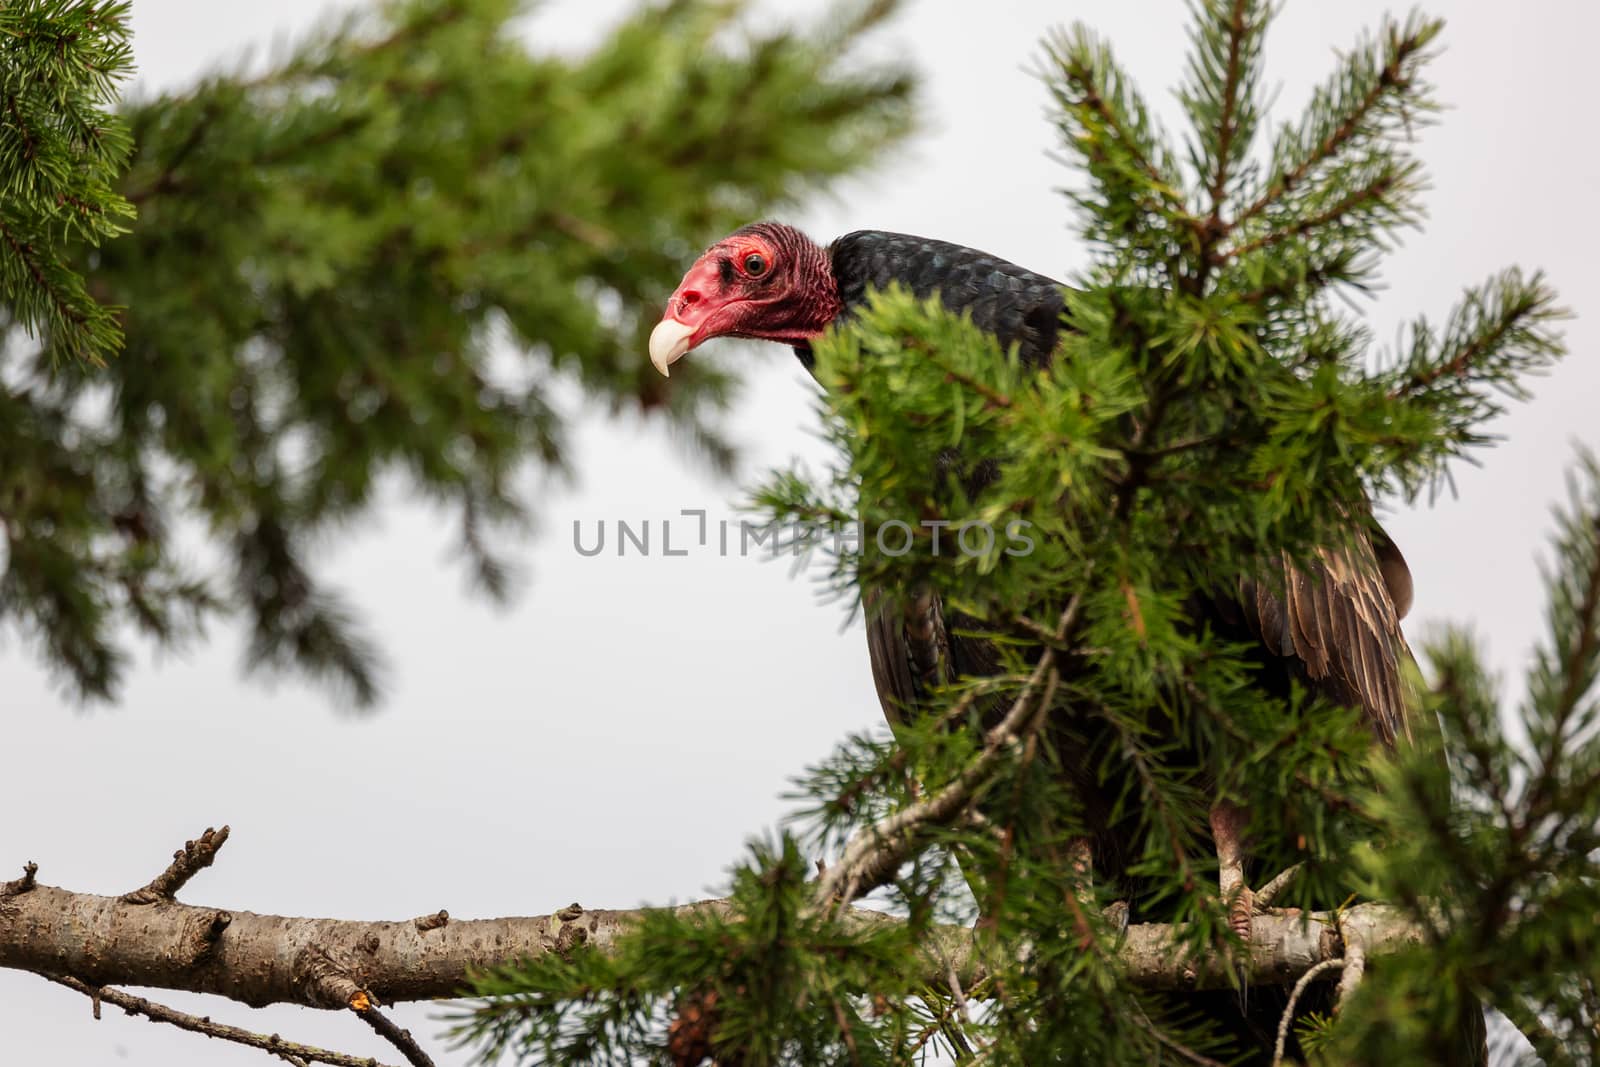 Daytime image of a vulture looking down at the camera from a tree.